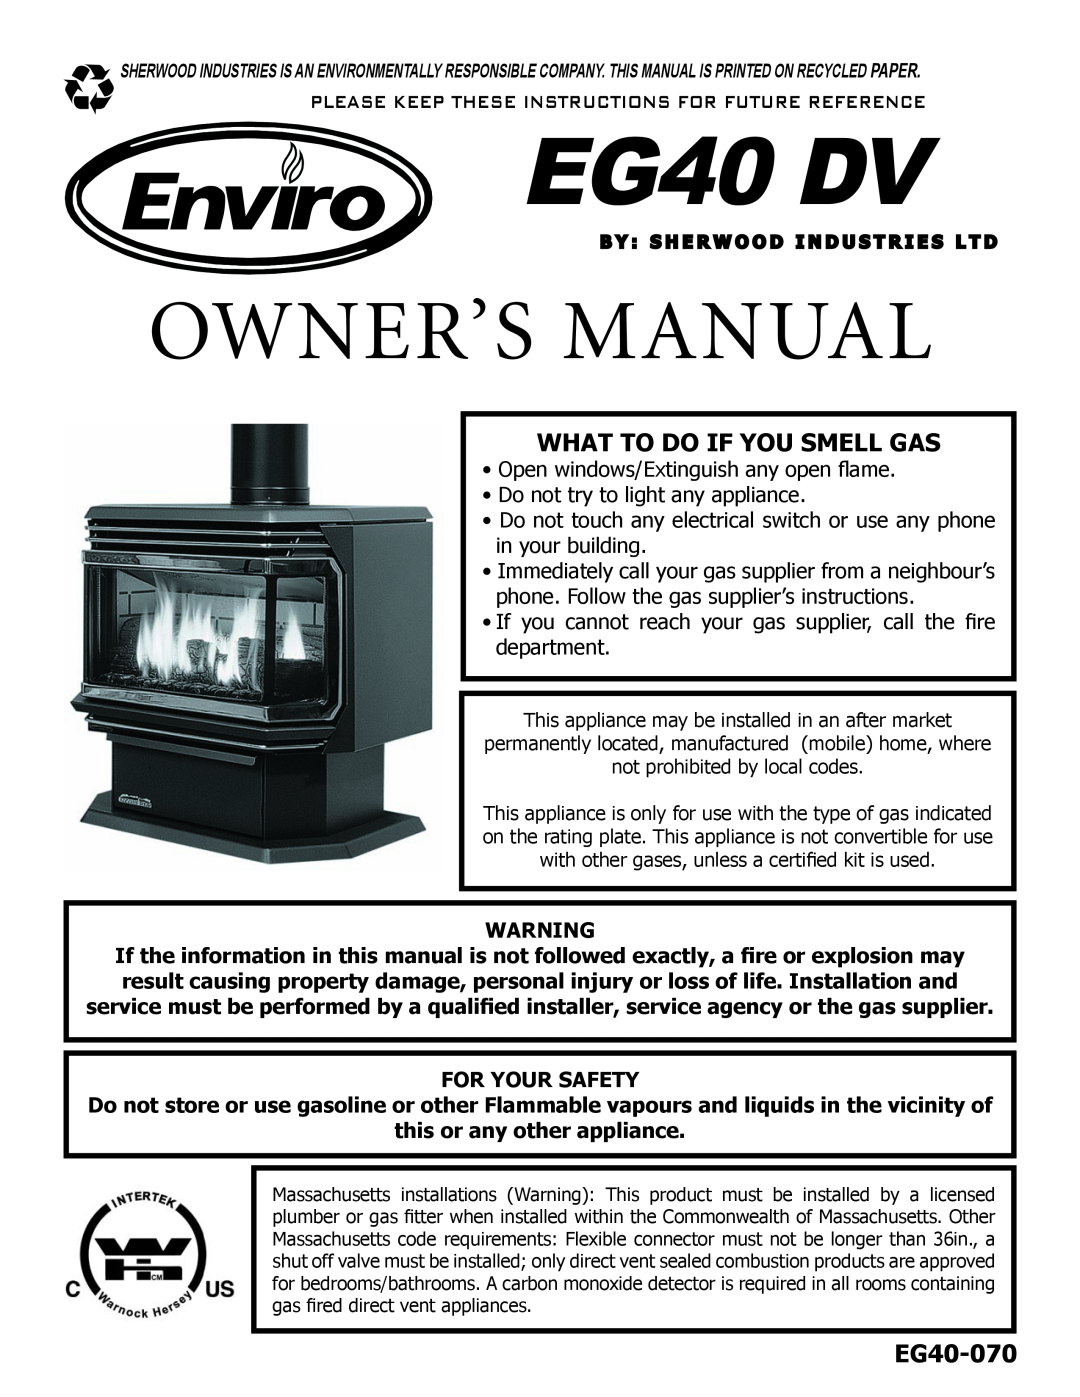 Enviro EG40-070 owner manual For Your Safety, this or any other appliance, EG40 DV, What To Do If You Smell Gas 